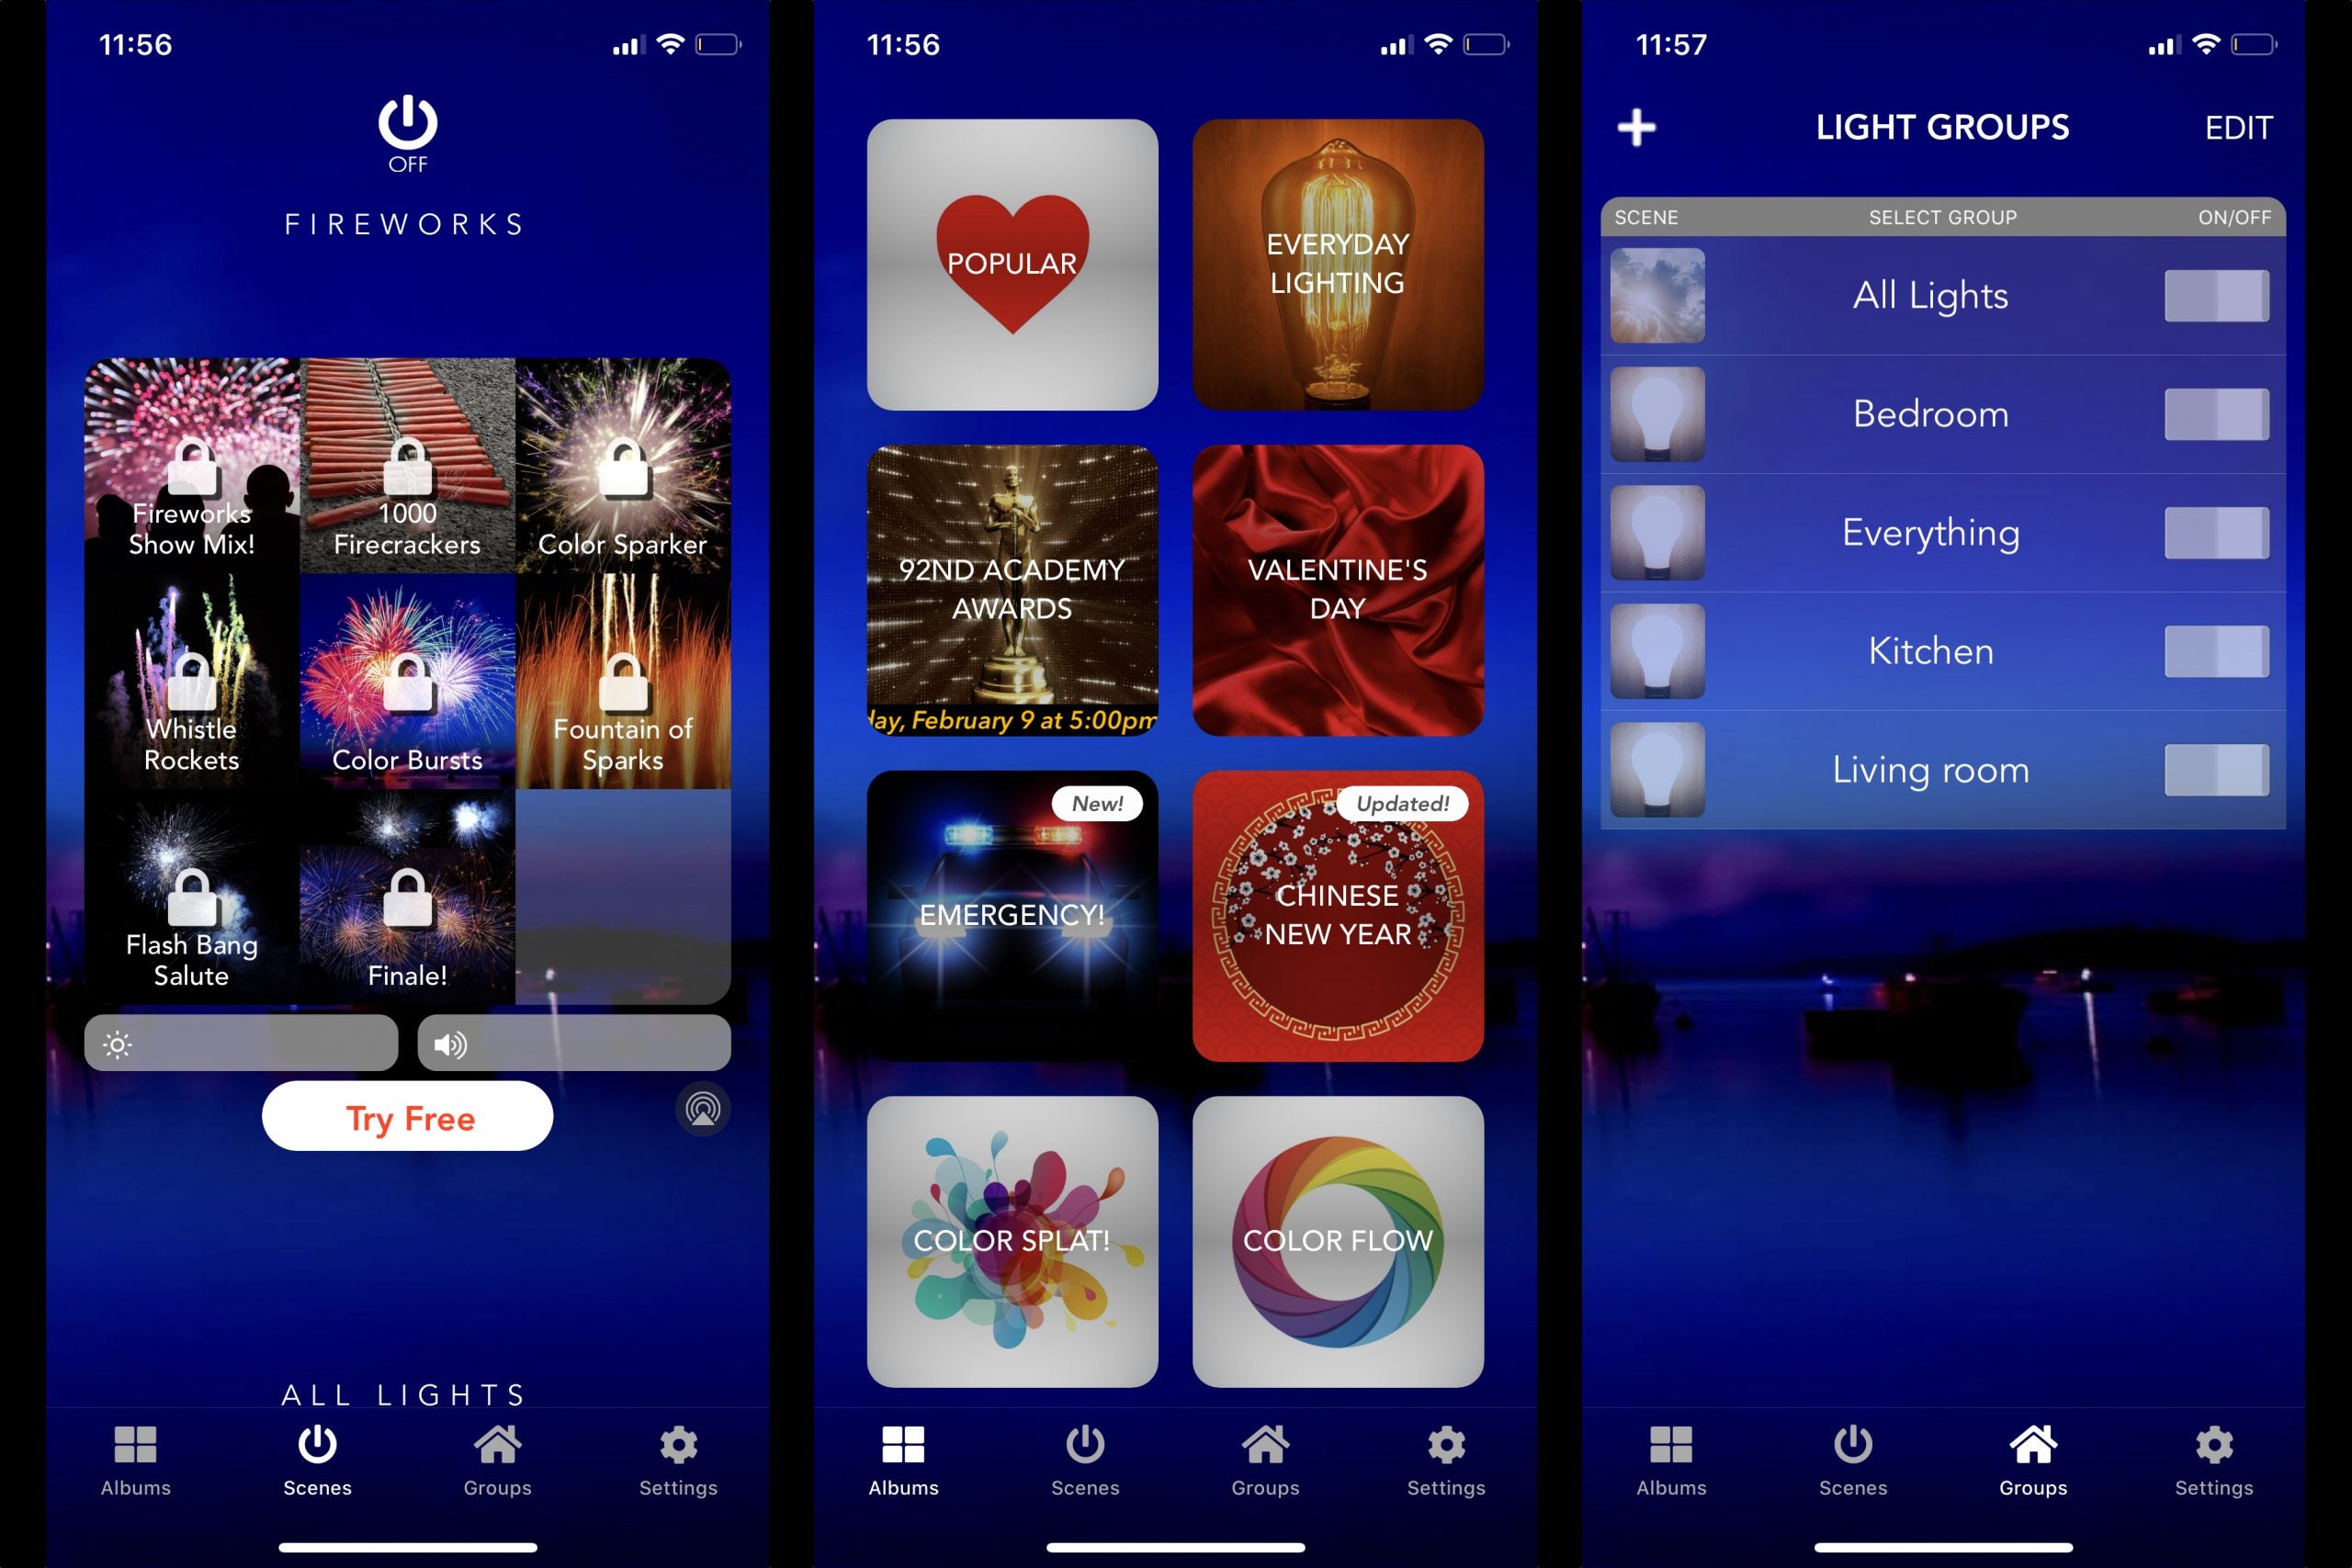 OnSwitch is one of the Philips Hue appsScreenshots from an app about fireworks, albums and light groups